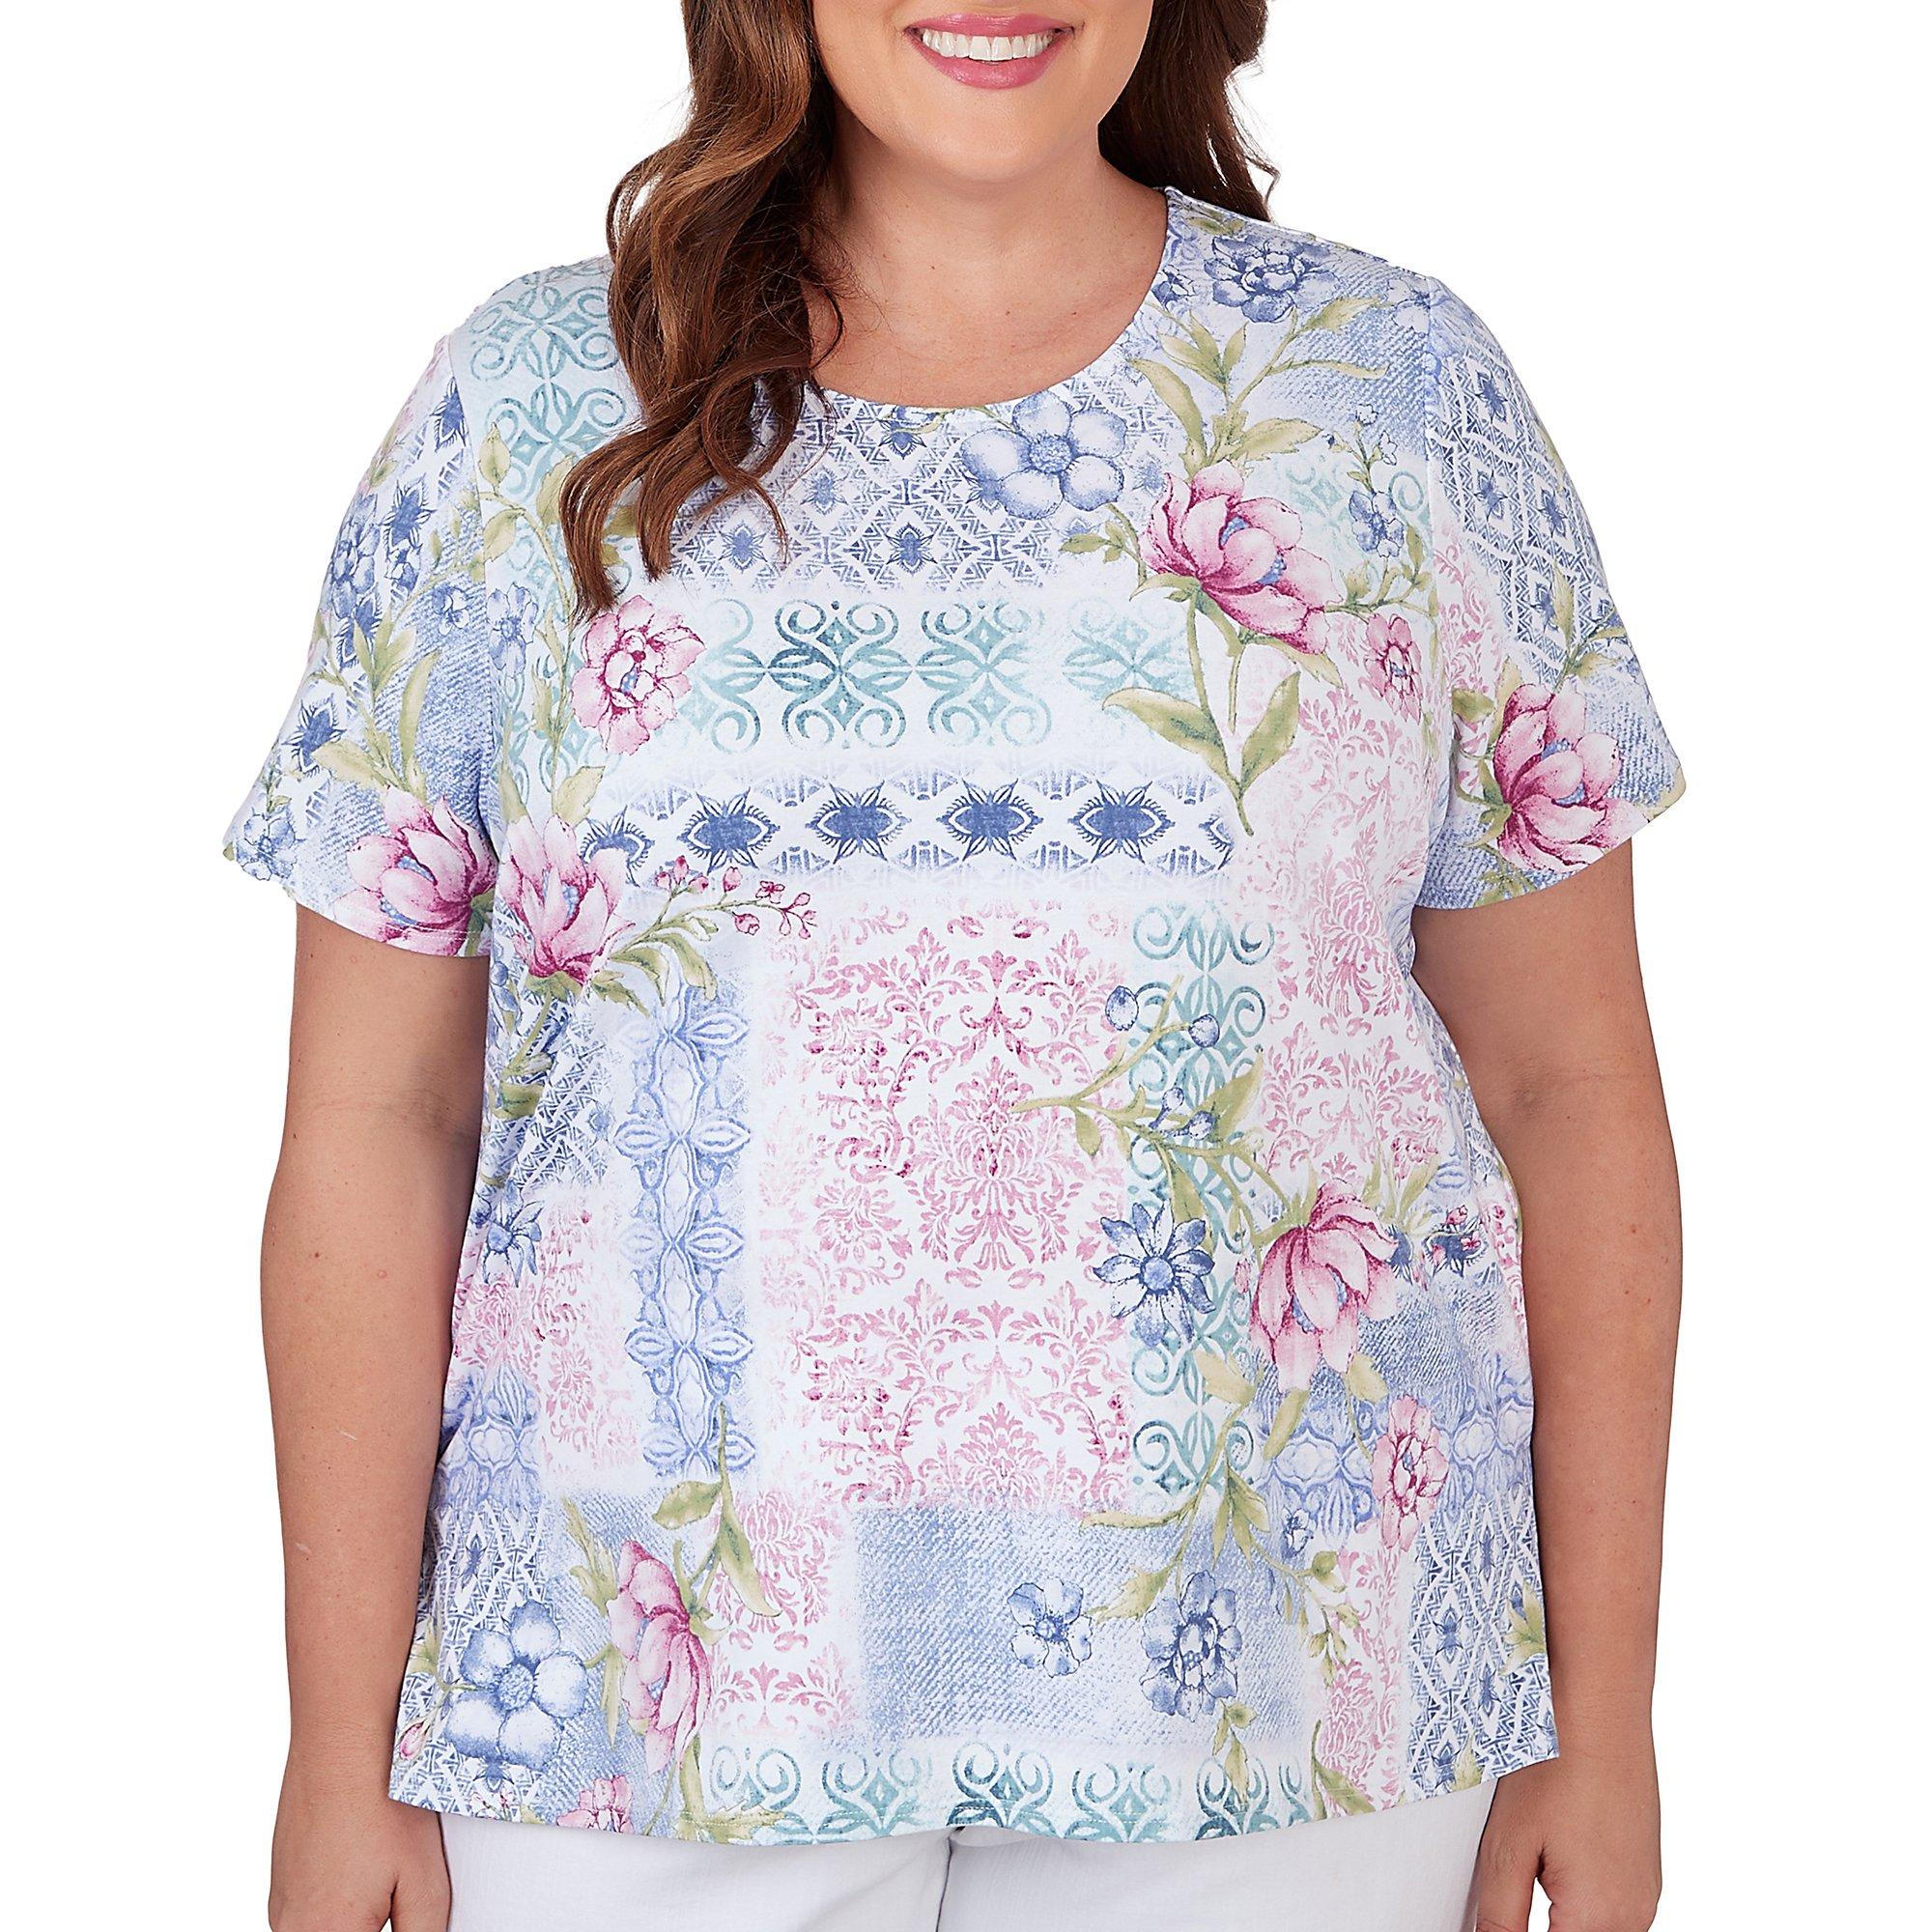 Alfred Dunner Plus Print Round Neck Short Sleeve Top